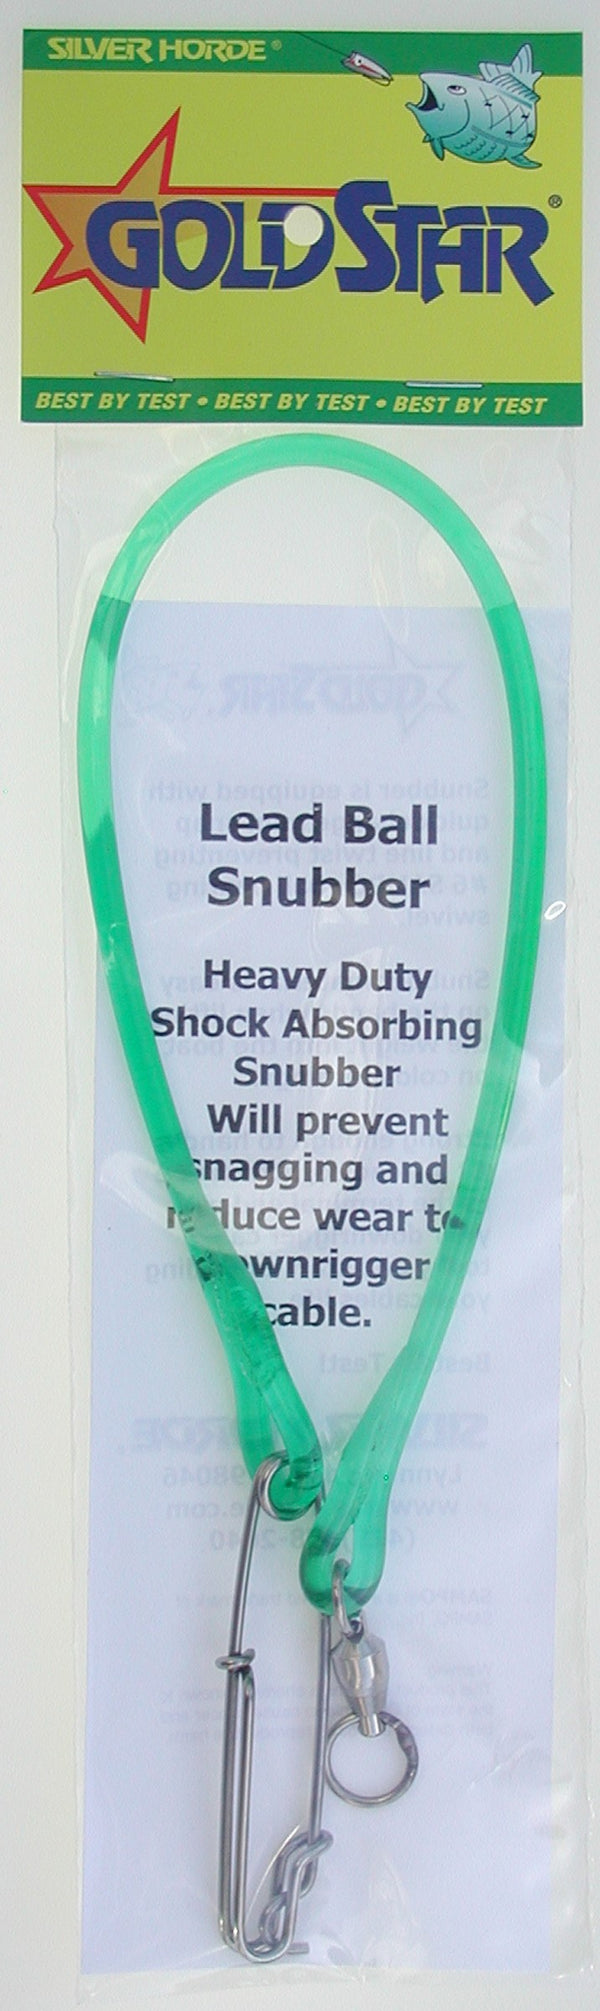 Gold Star 1 Foot Lead Ball Snubber